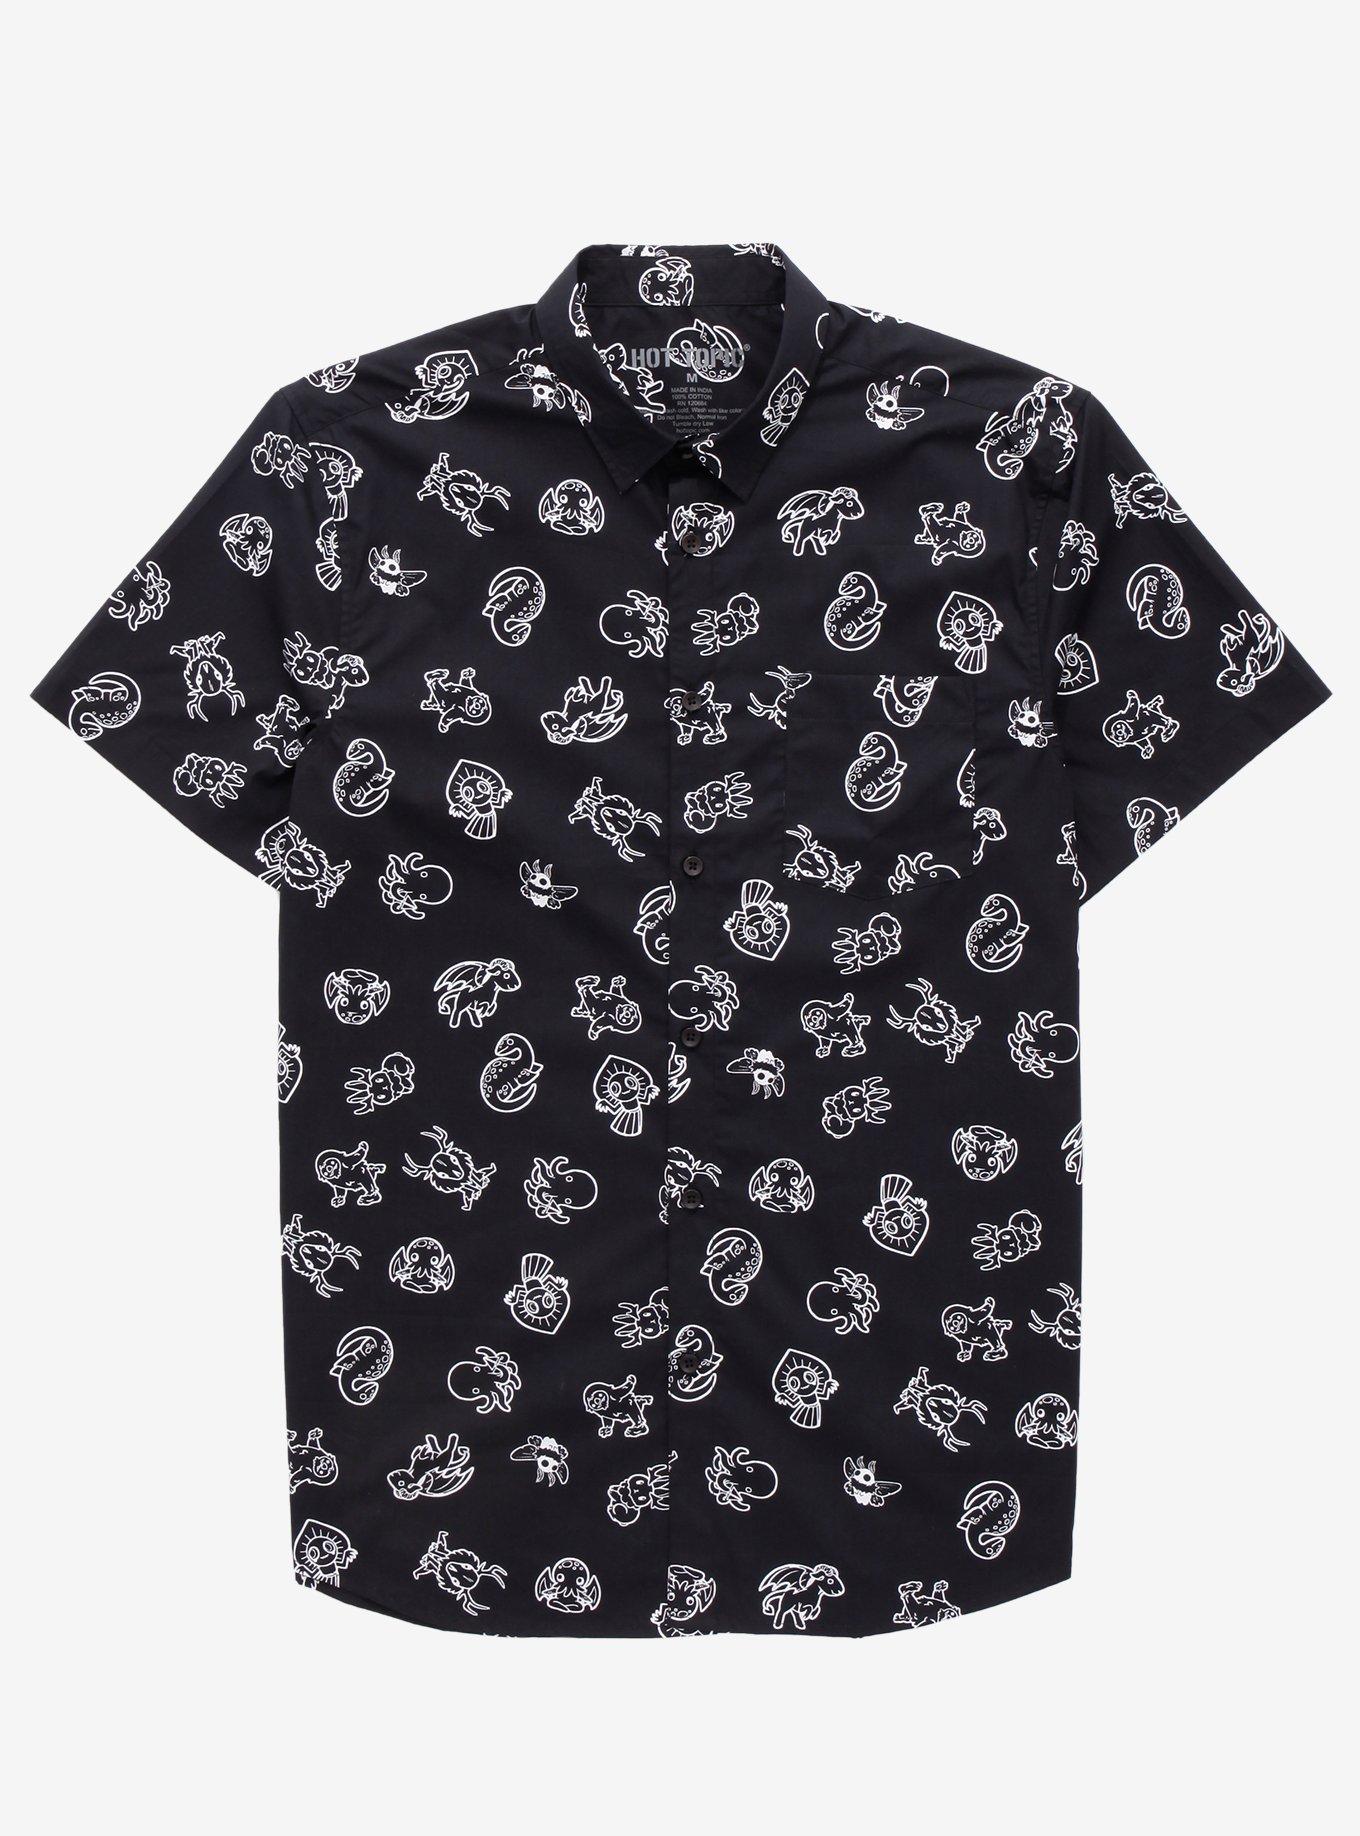 Black & White Cryptids Woven Button-Up | Hot Topic